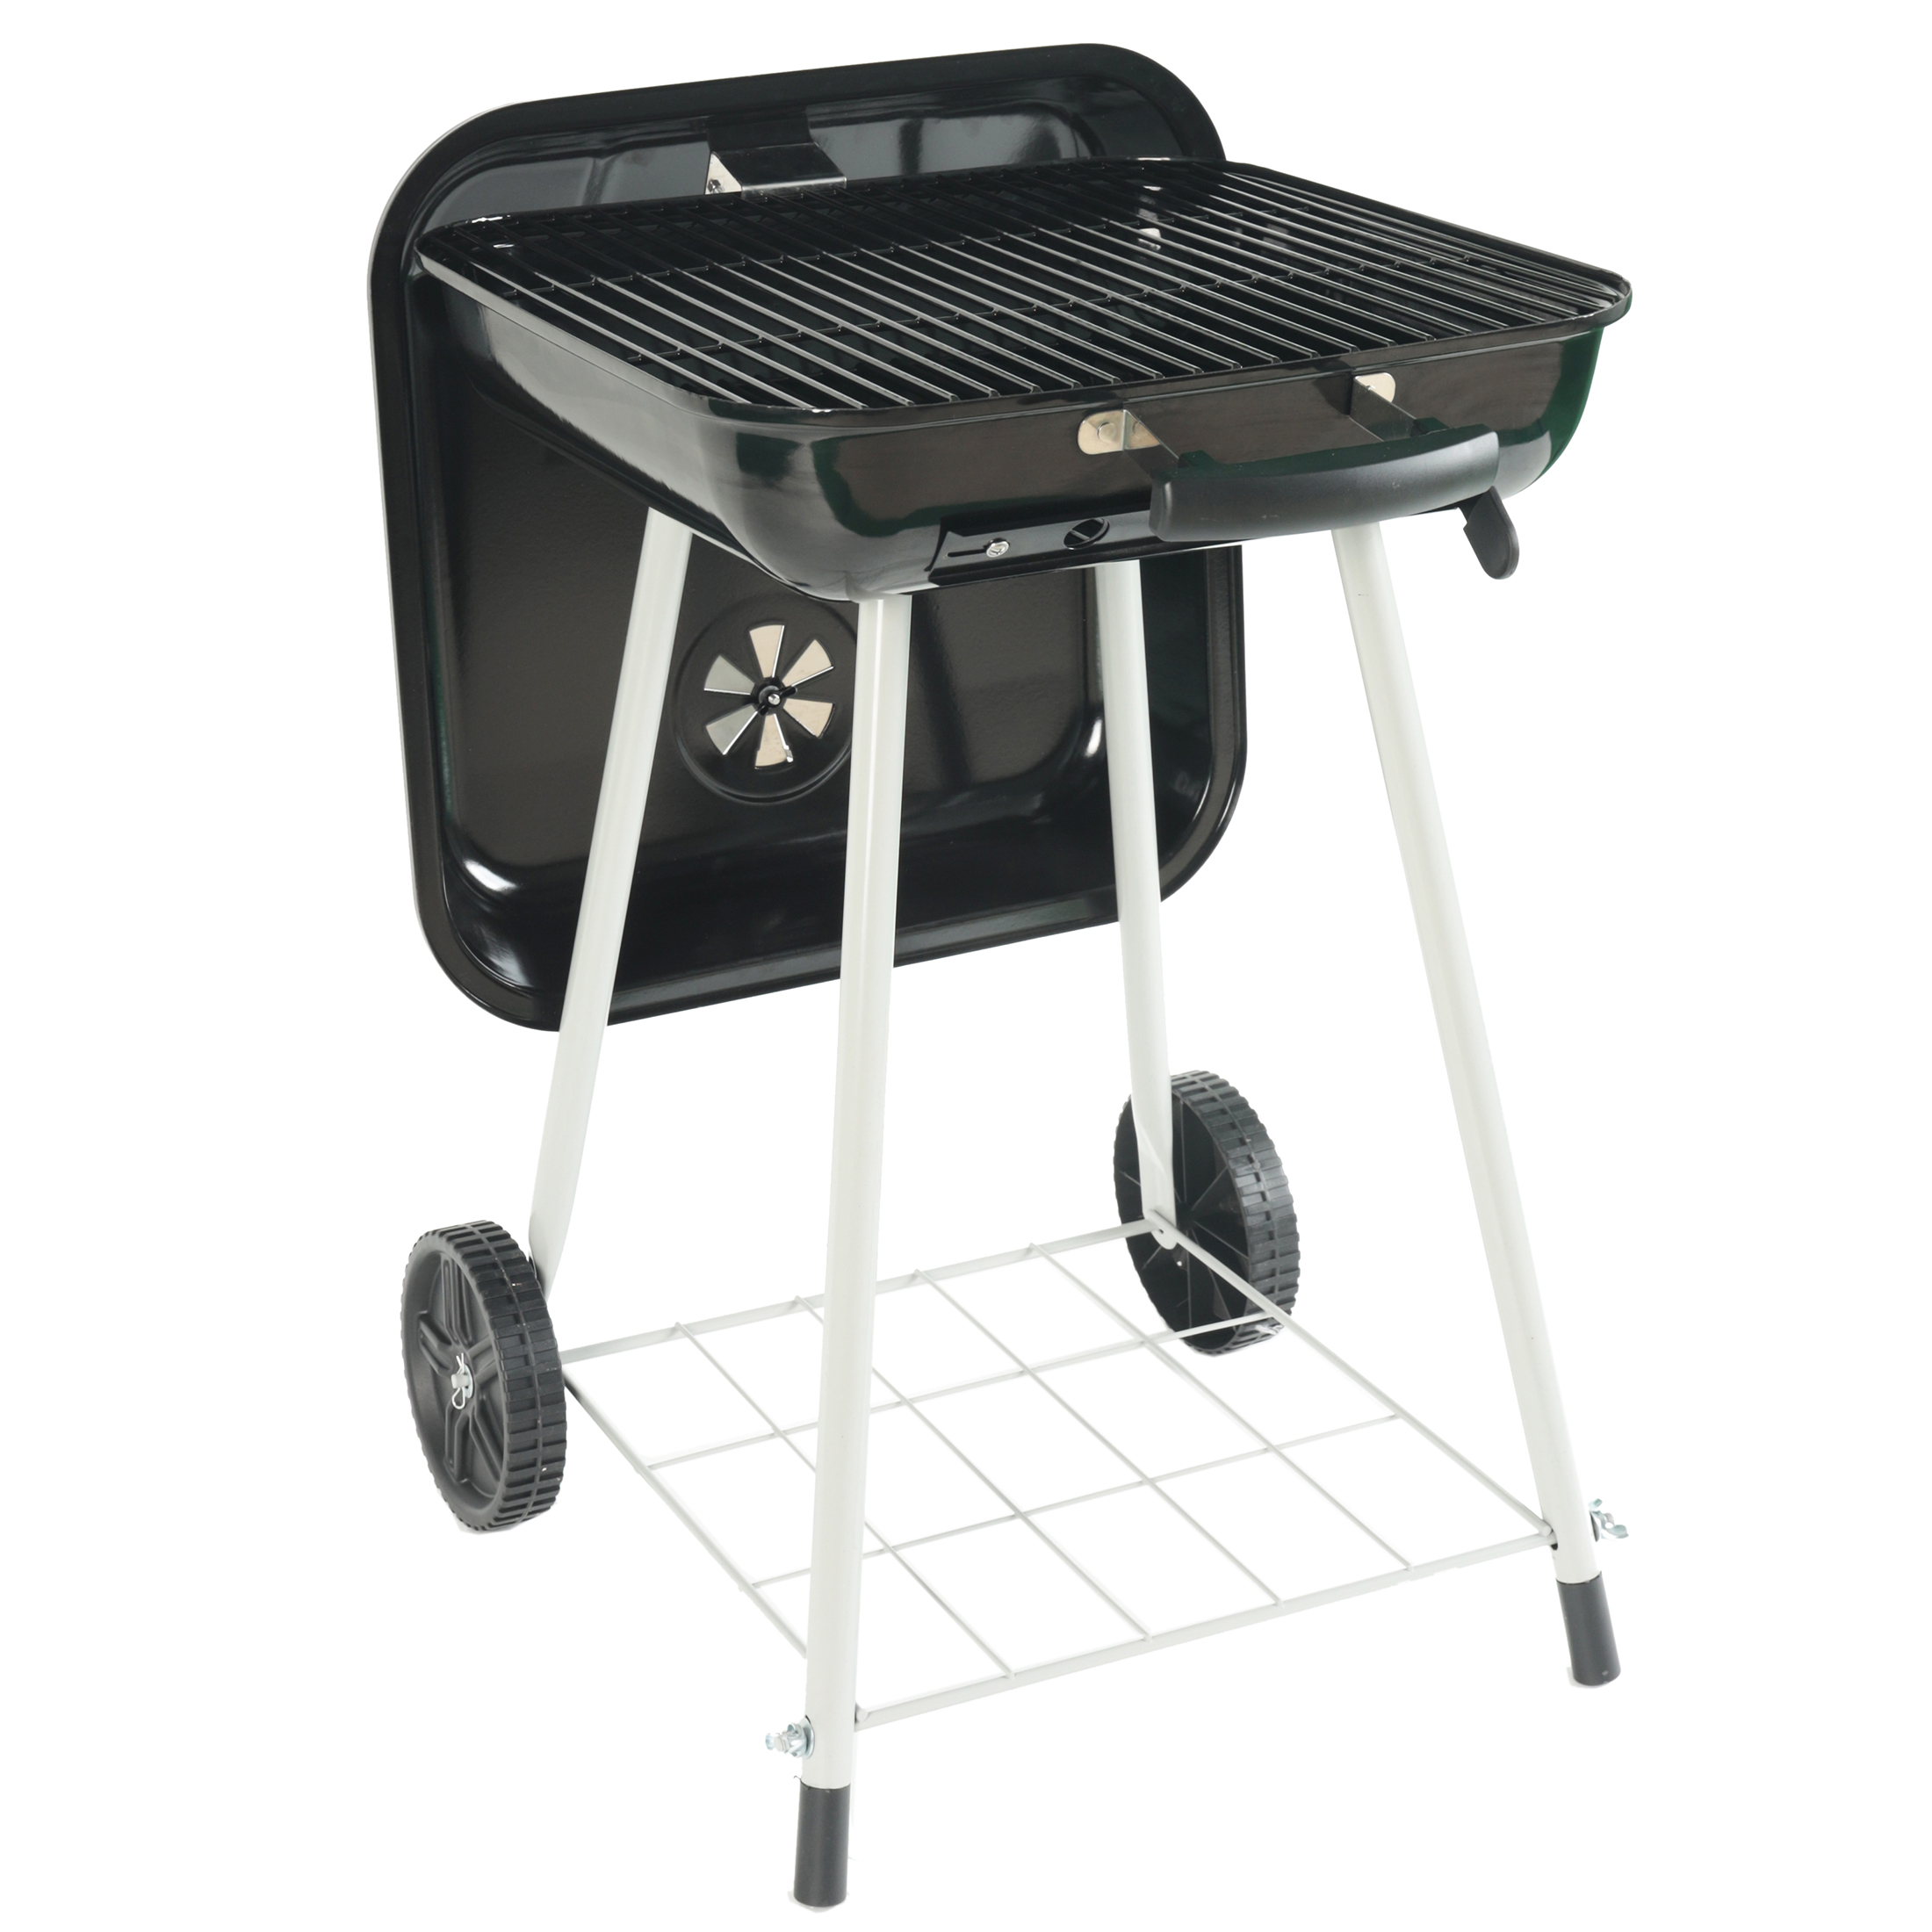 Expert Grill 17.5" Square Steel Charcoal Grill with Wheels, Black - image 5 of 18